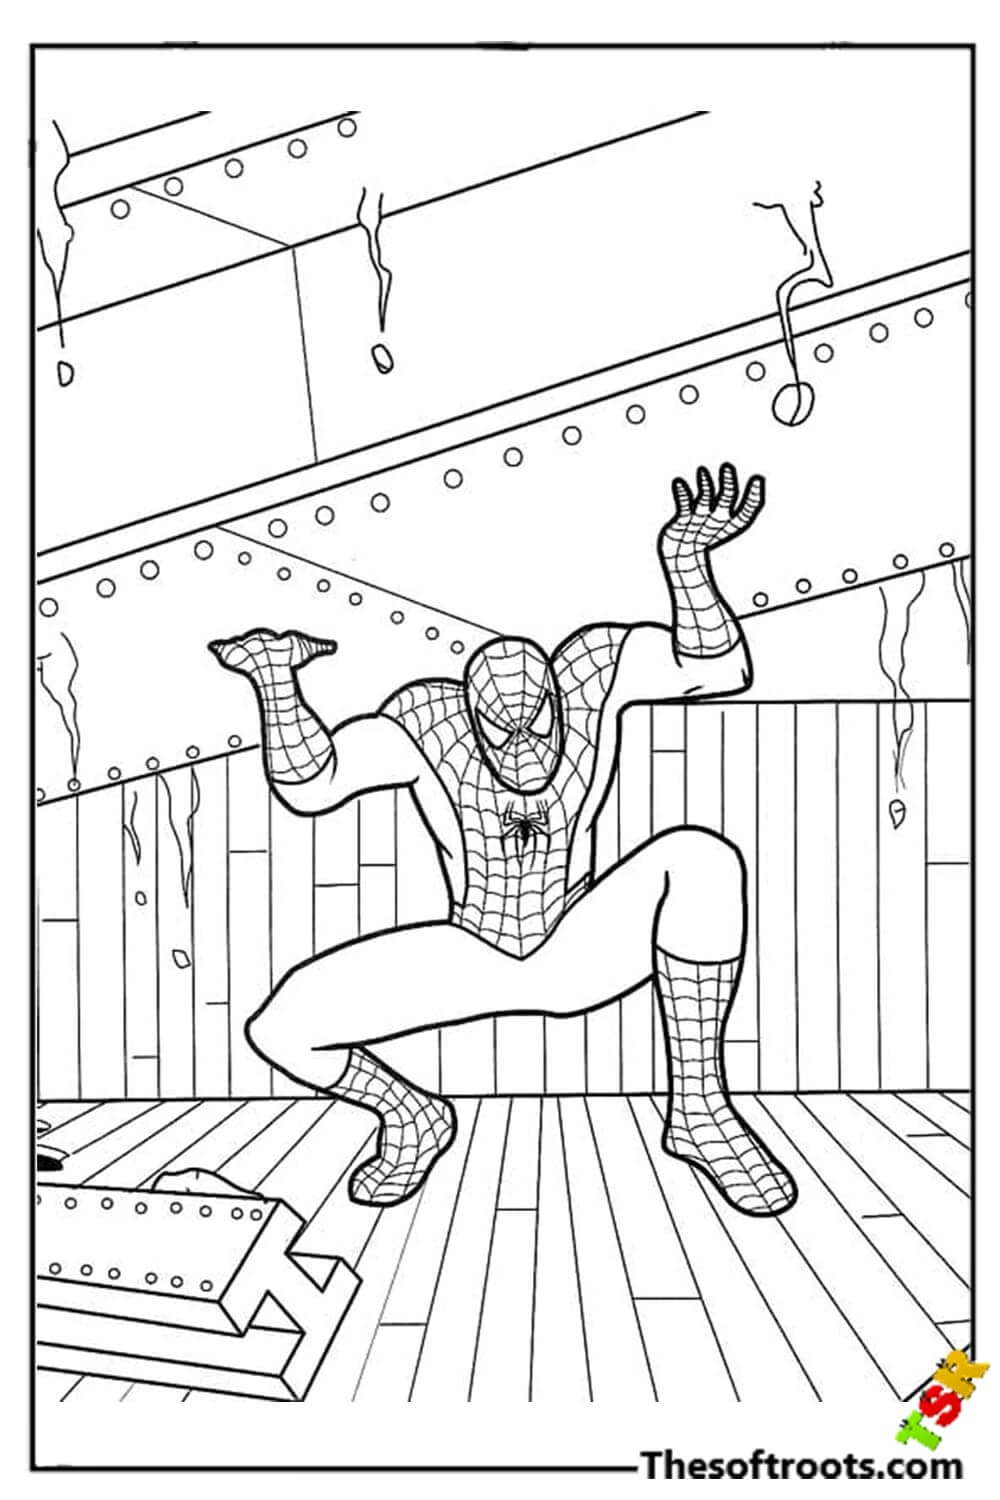 Strong Spiderman coloring pages